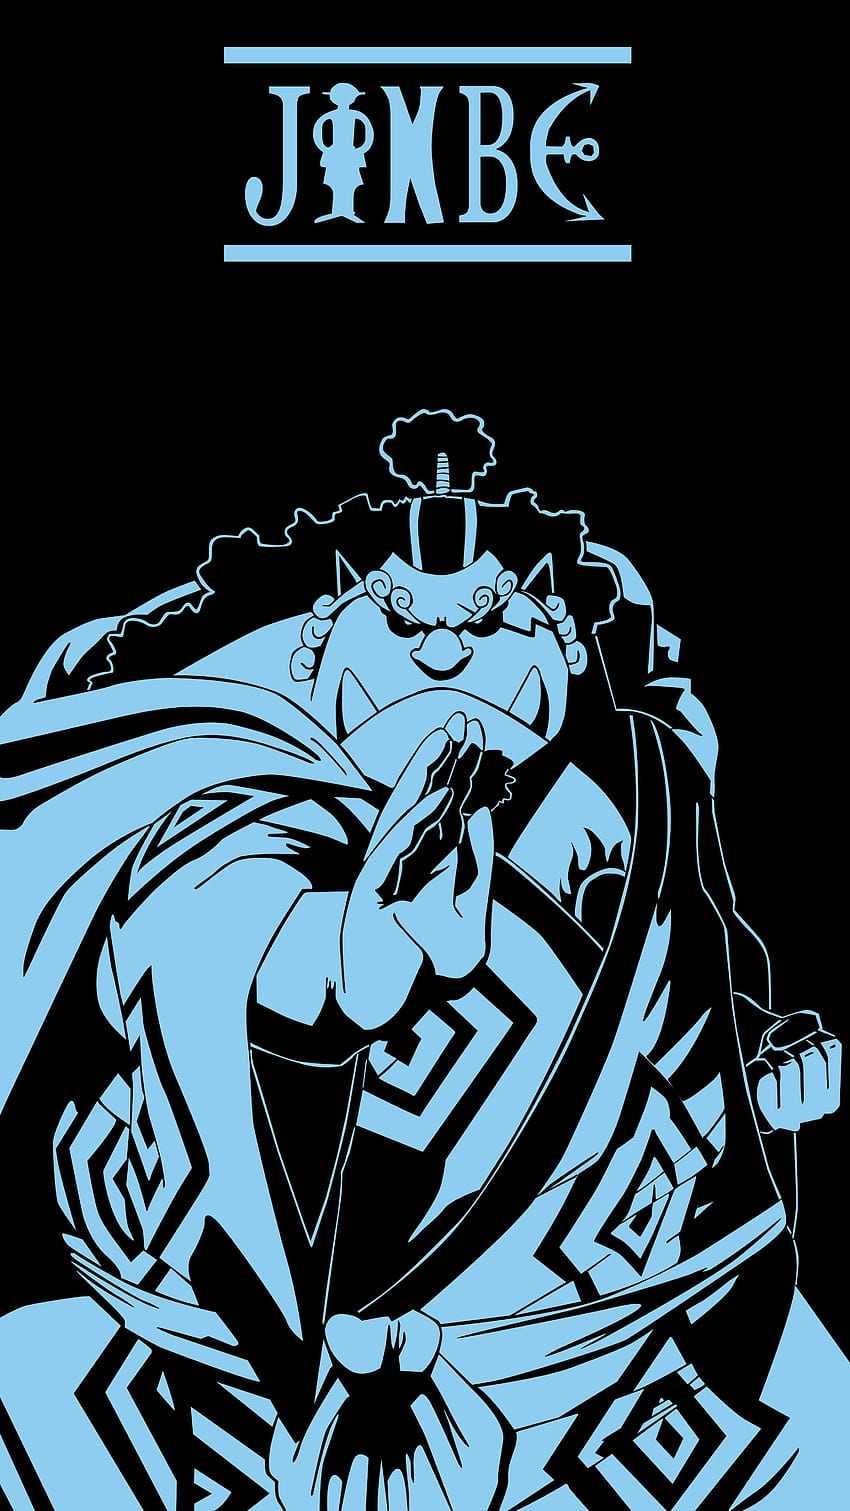 And here we have the last Strawhat (at least for now) Jinbe. Sorry, Jinbei HD phone wallpaper